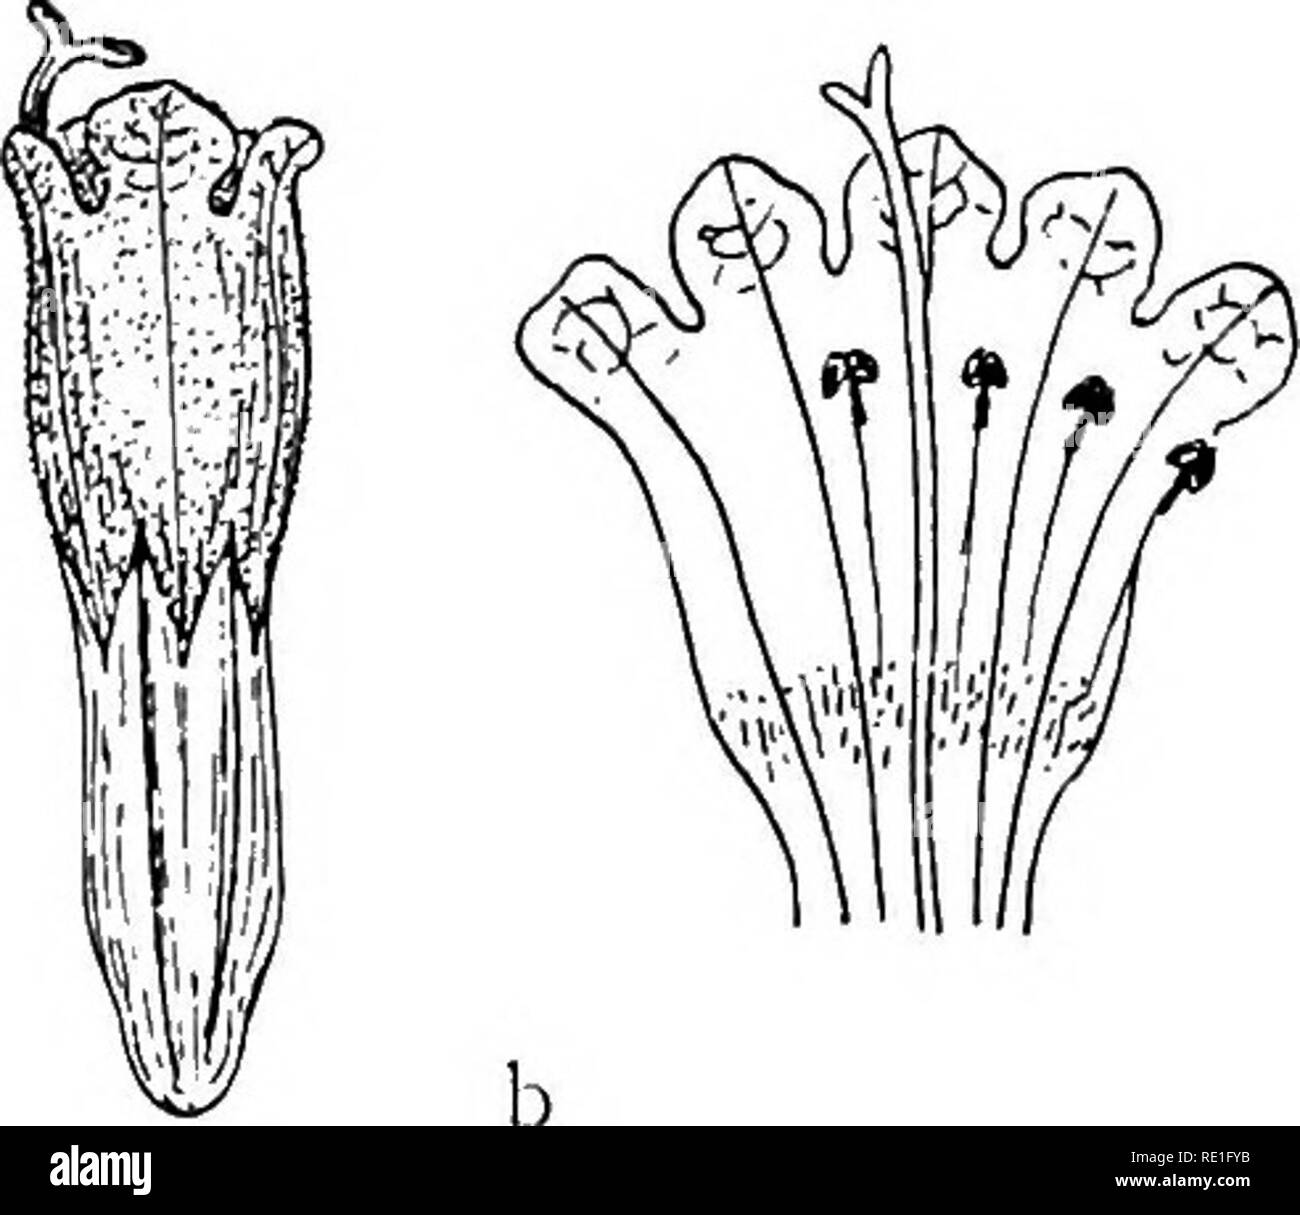 . The phanerogams of the Juan Fernandez Islands. Botany. Fig. 22. Cuminia fernandezia: a male or bisexual, b female flower, with limbs slit open to show stamens and staminodes. X 4- Piedra Agujereada and Q. Laura (f. magis pilosa); in the higher parts of El Rabanal (also quoted by Johow; fl. 28/3 17, no. 576, f. magis pilosa); slopes of Co Damajuana, 350—530 m; V. Colonial, C. Central (fl. 18/i 17, no. 307); Portezuelo de Villagra (also observed by Johow), 540—590 m, scarce (beg. fl. 25/i2 16, no. 192, fr. 81J3 17, no. 192 b); Q. del Monte Maderugo, rocky ridge, 390—500 m; C. Salsipuedes (also Stock Photo